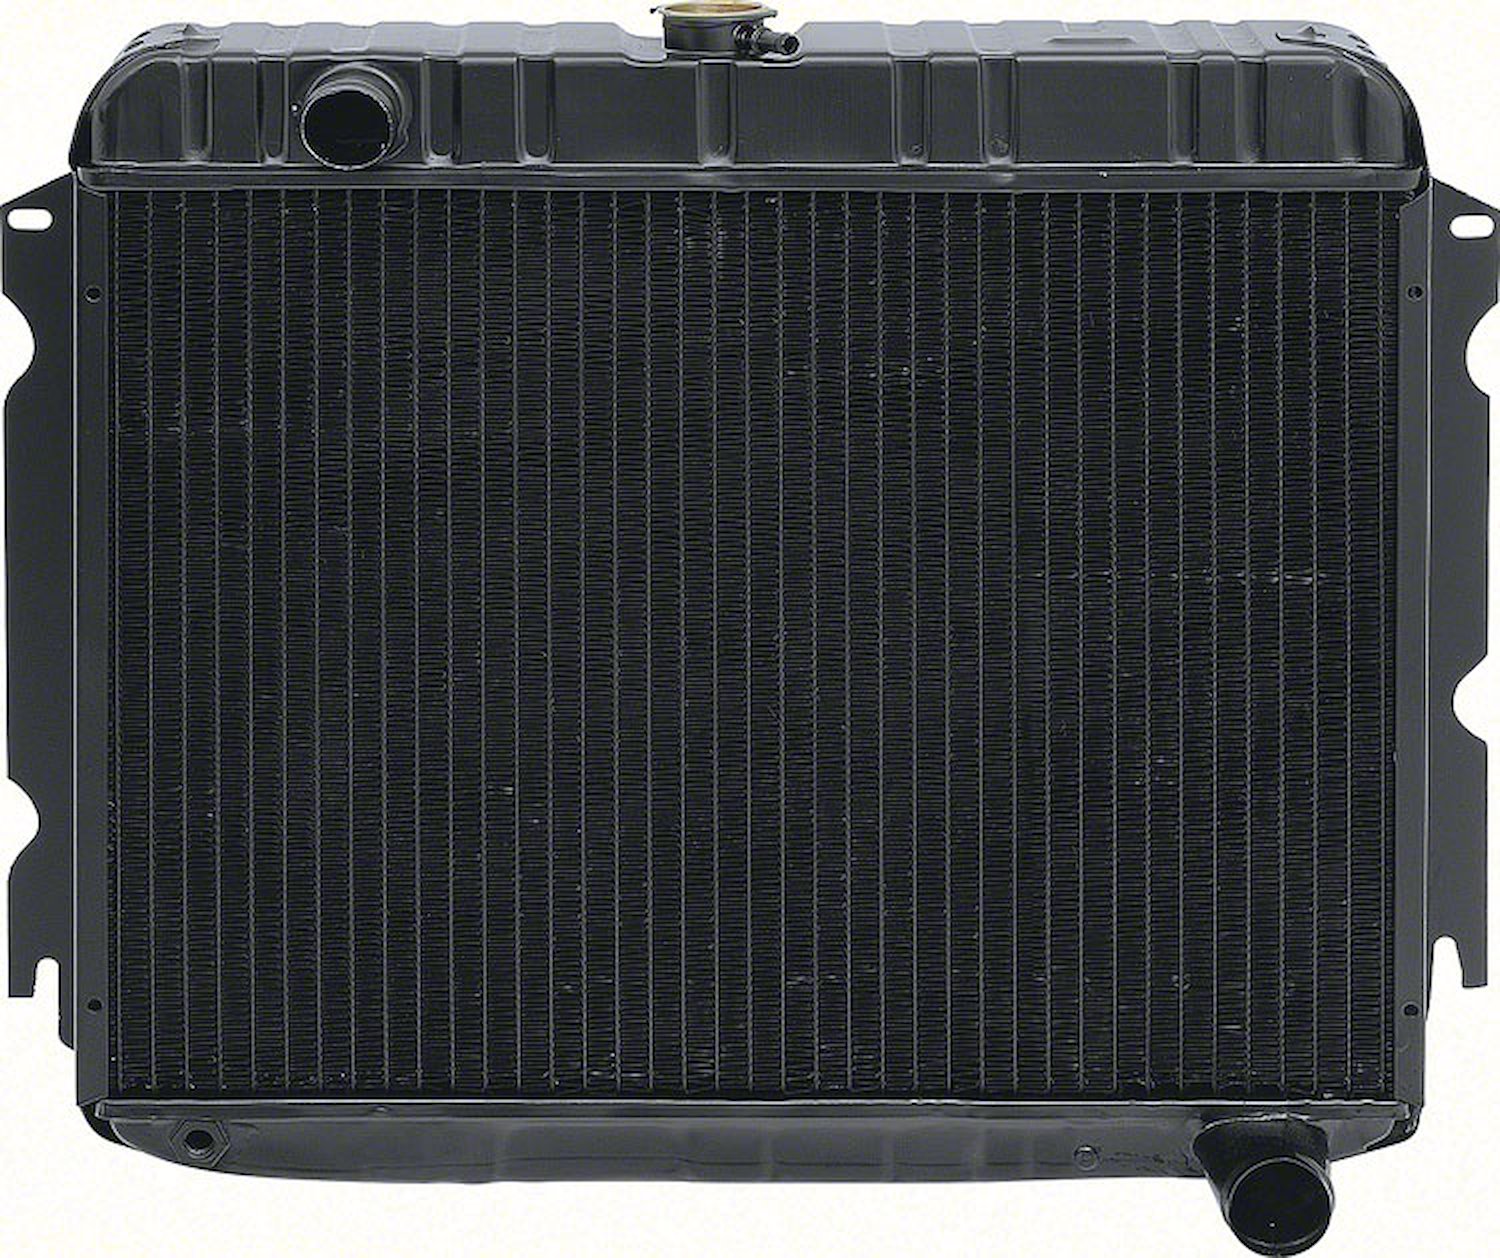 MA2262S Replacement Radiator 1973 Mopar A-Body With 6 Cylinder And Standard Trans 4 Row